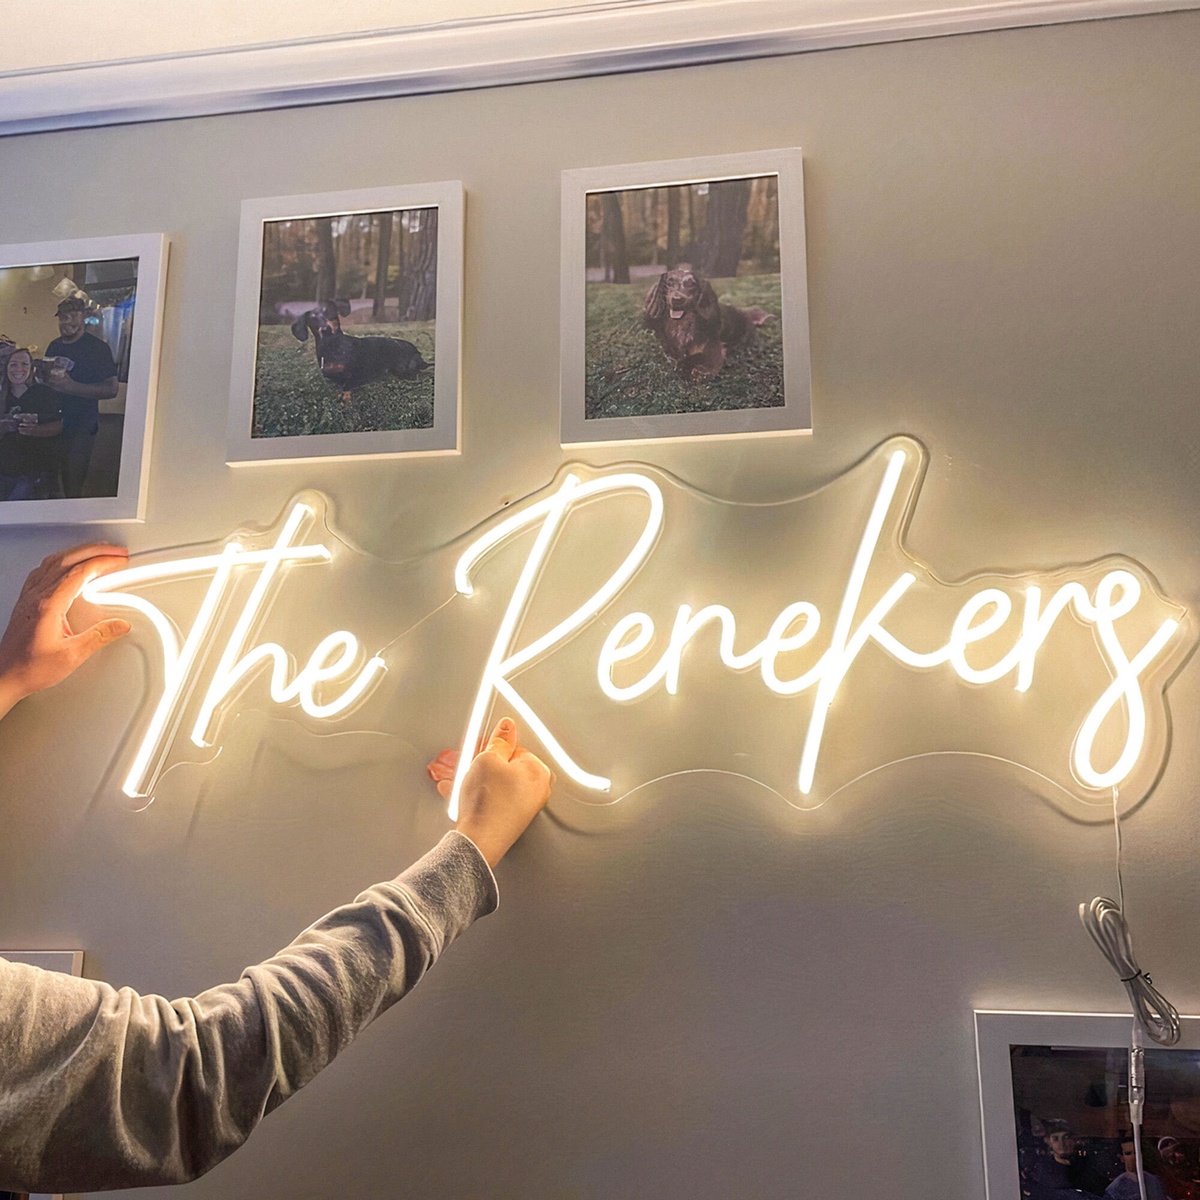 Affordable Custom Neon Signs: Making Your Vision Shine on a Budget